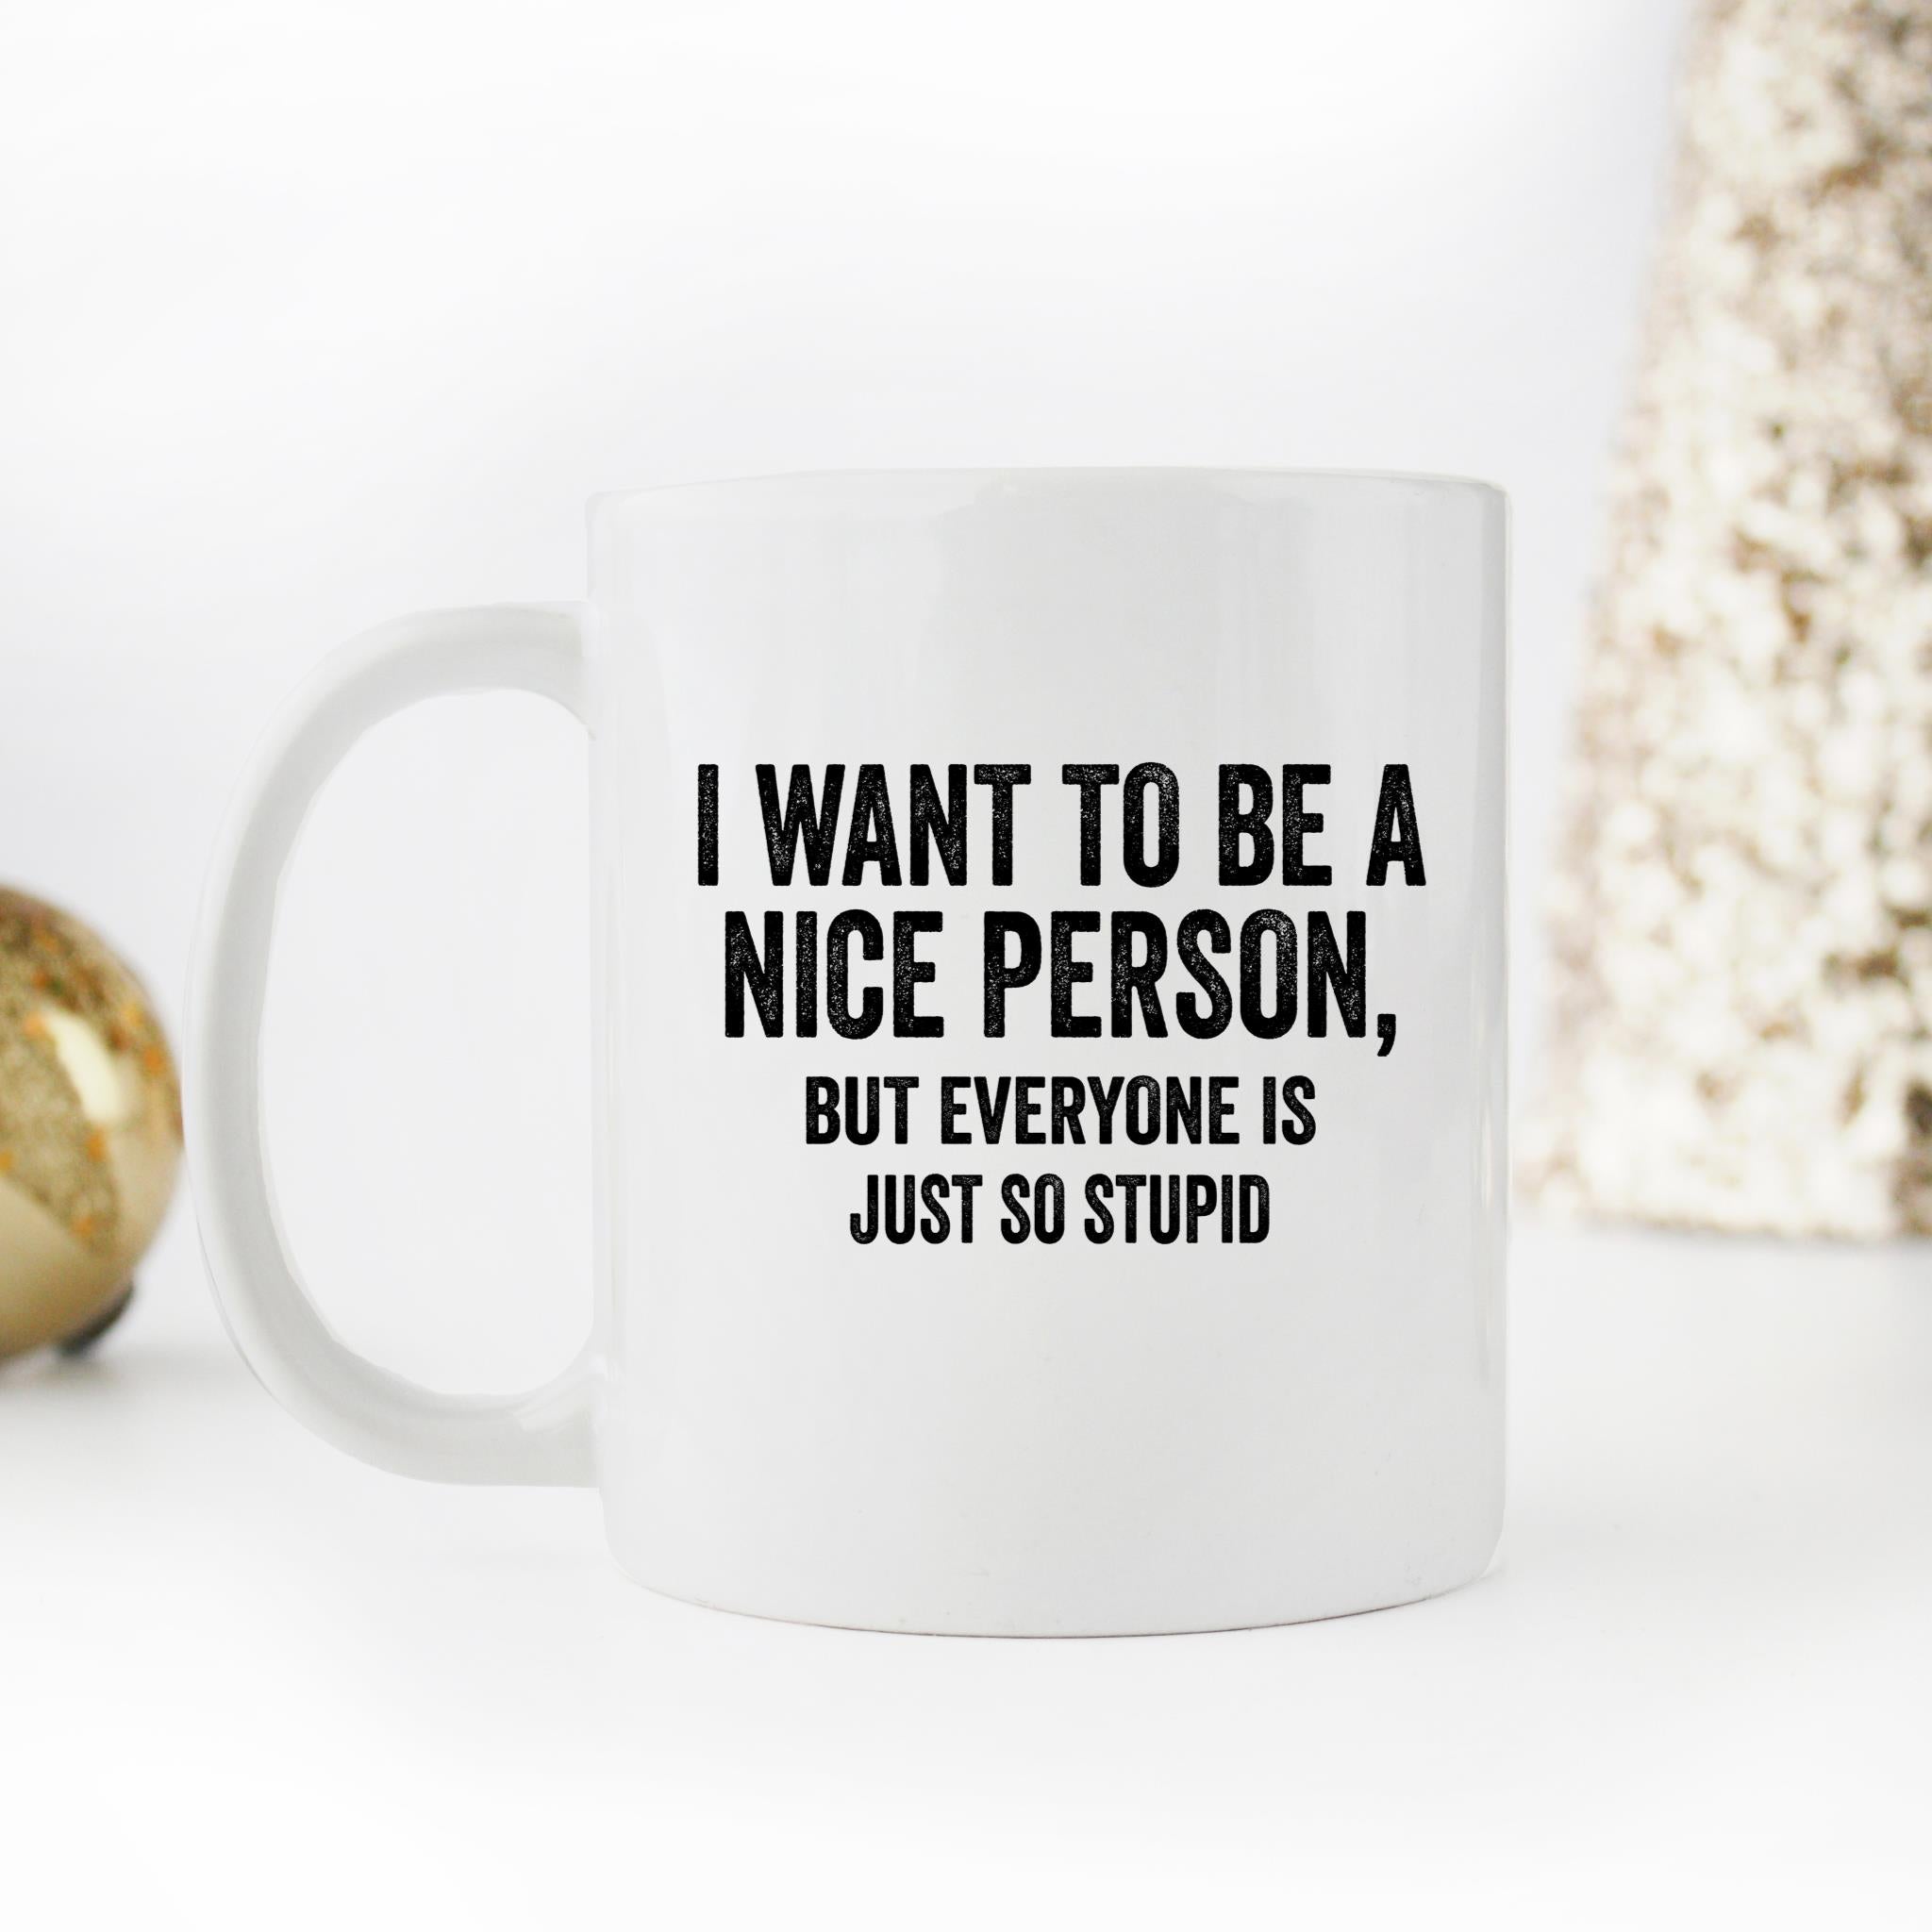 Skitongifts Funny Ceramic Novelty Coffee Mug I Want To Be A Nice Person, But Everyone Is So Stupid 6sykxPd